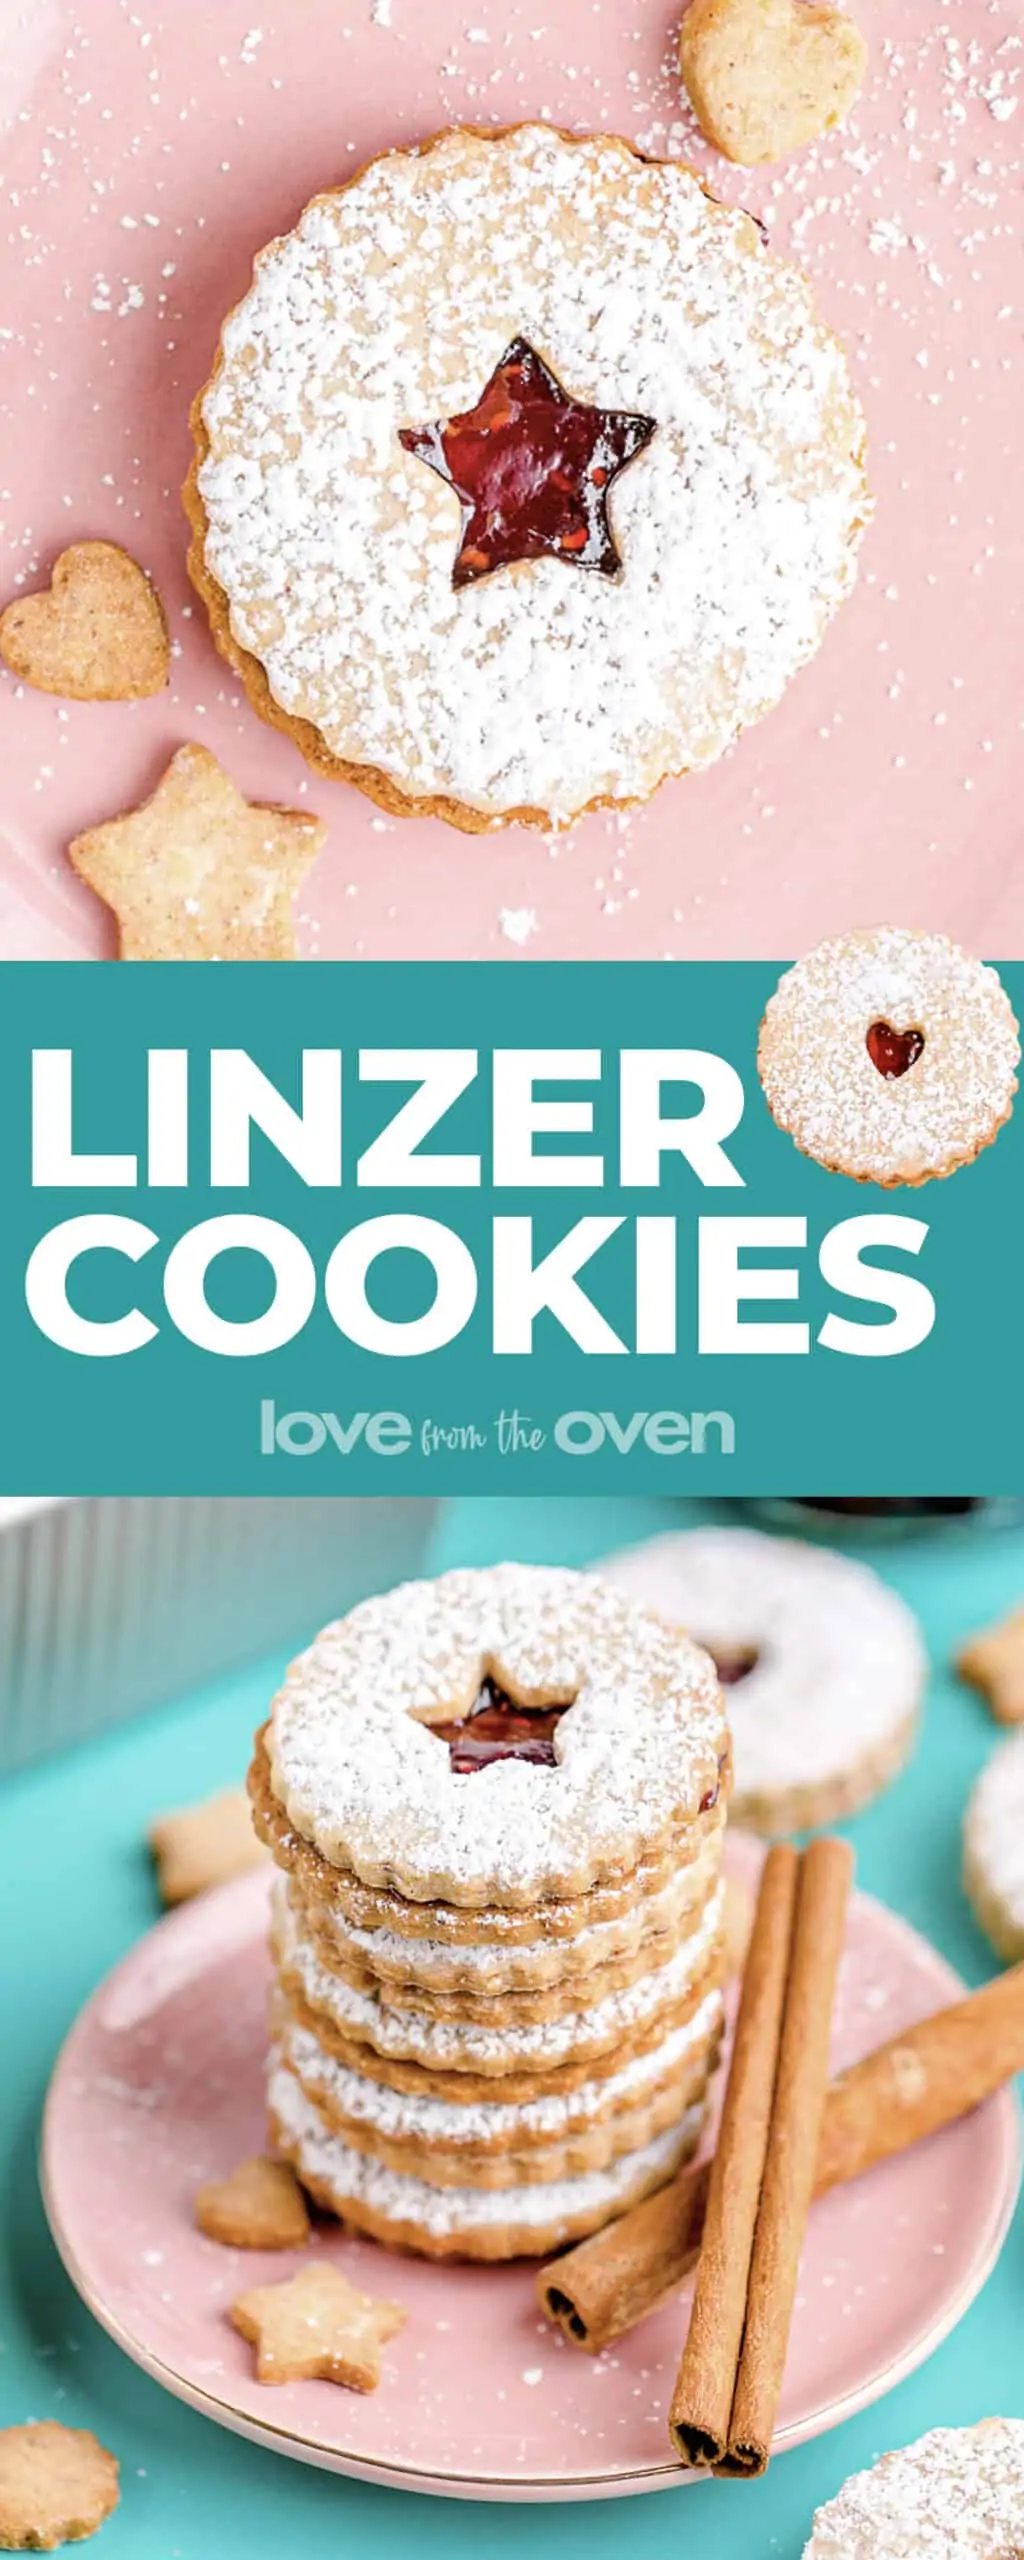 Linzer cookies on blue and pink backgrounds